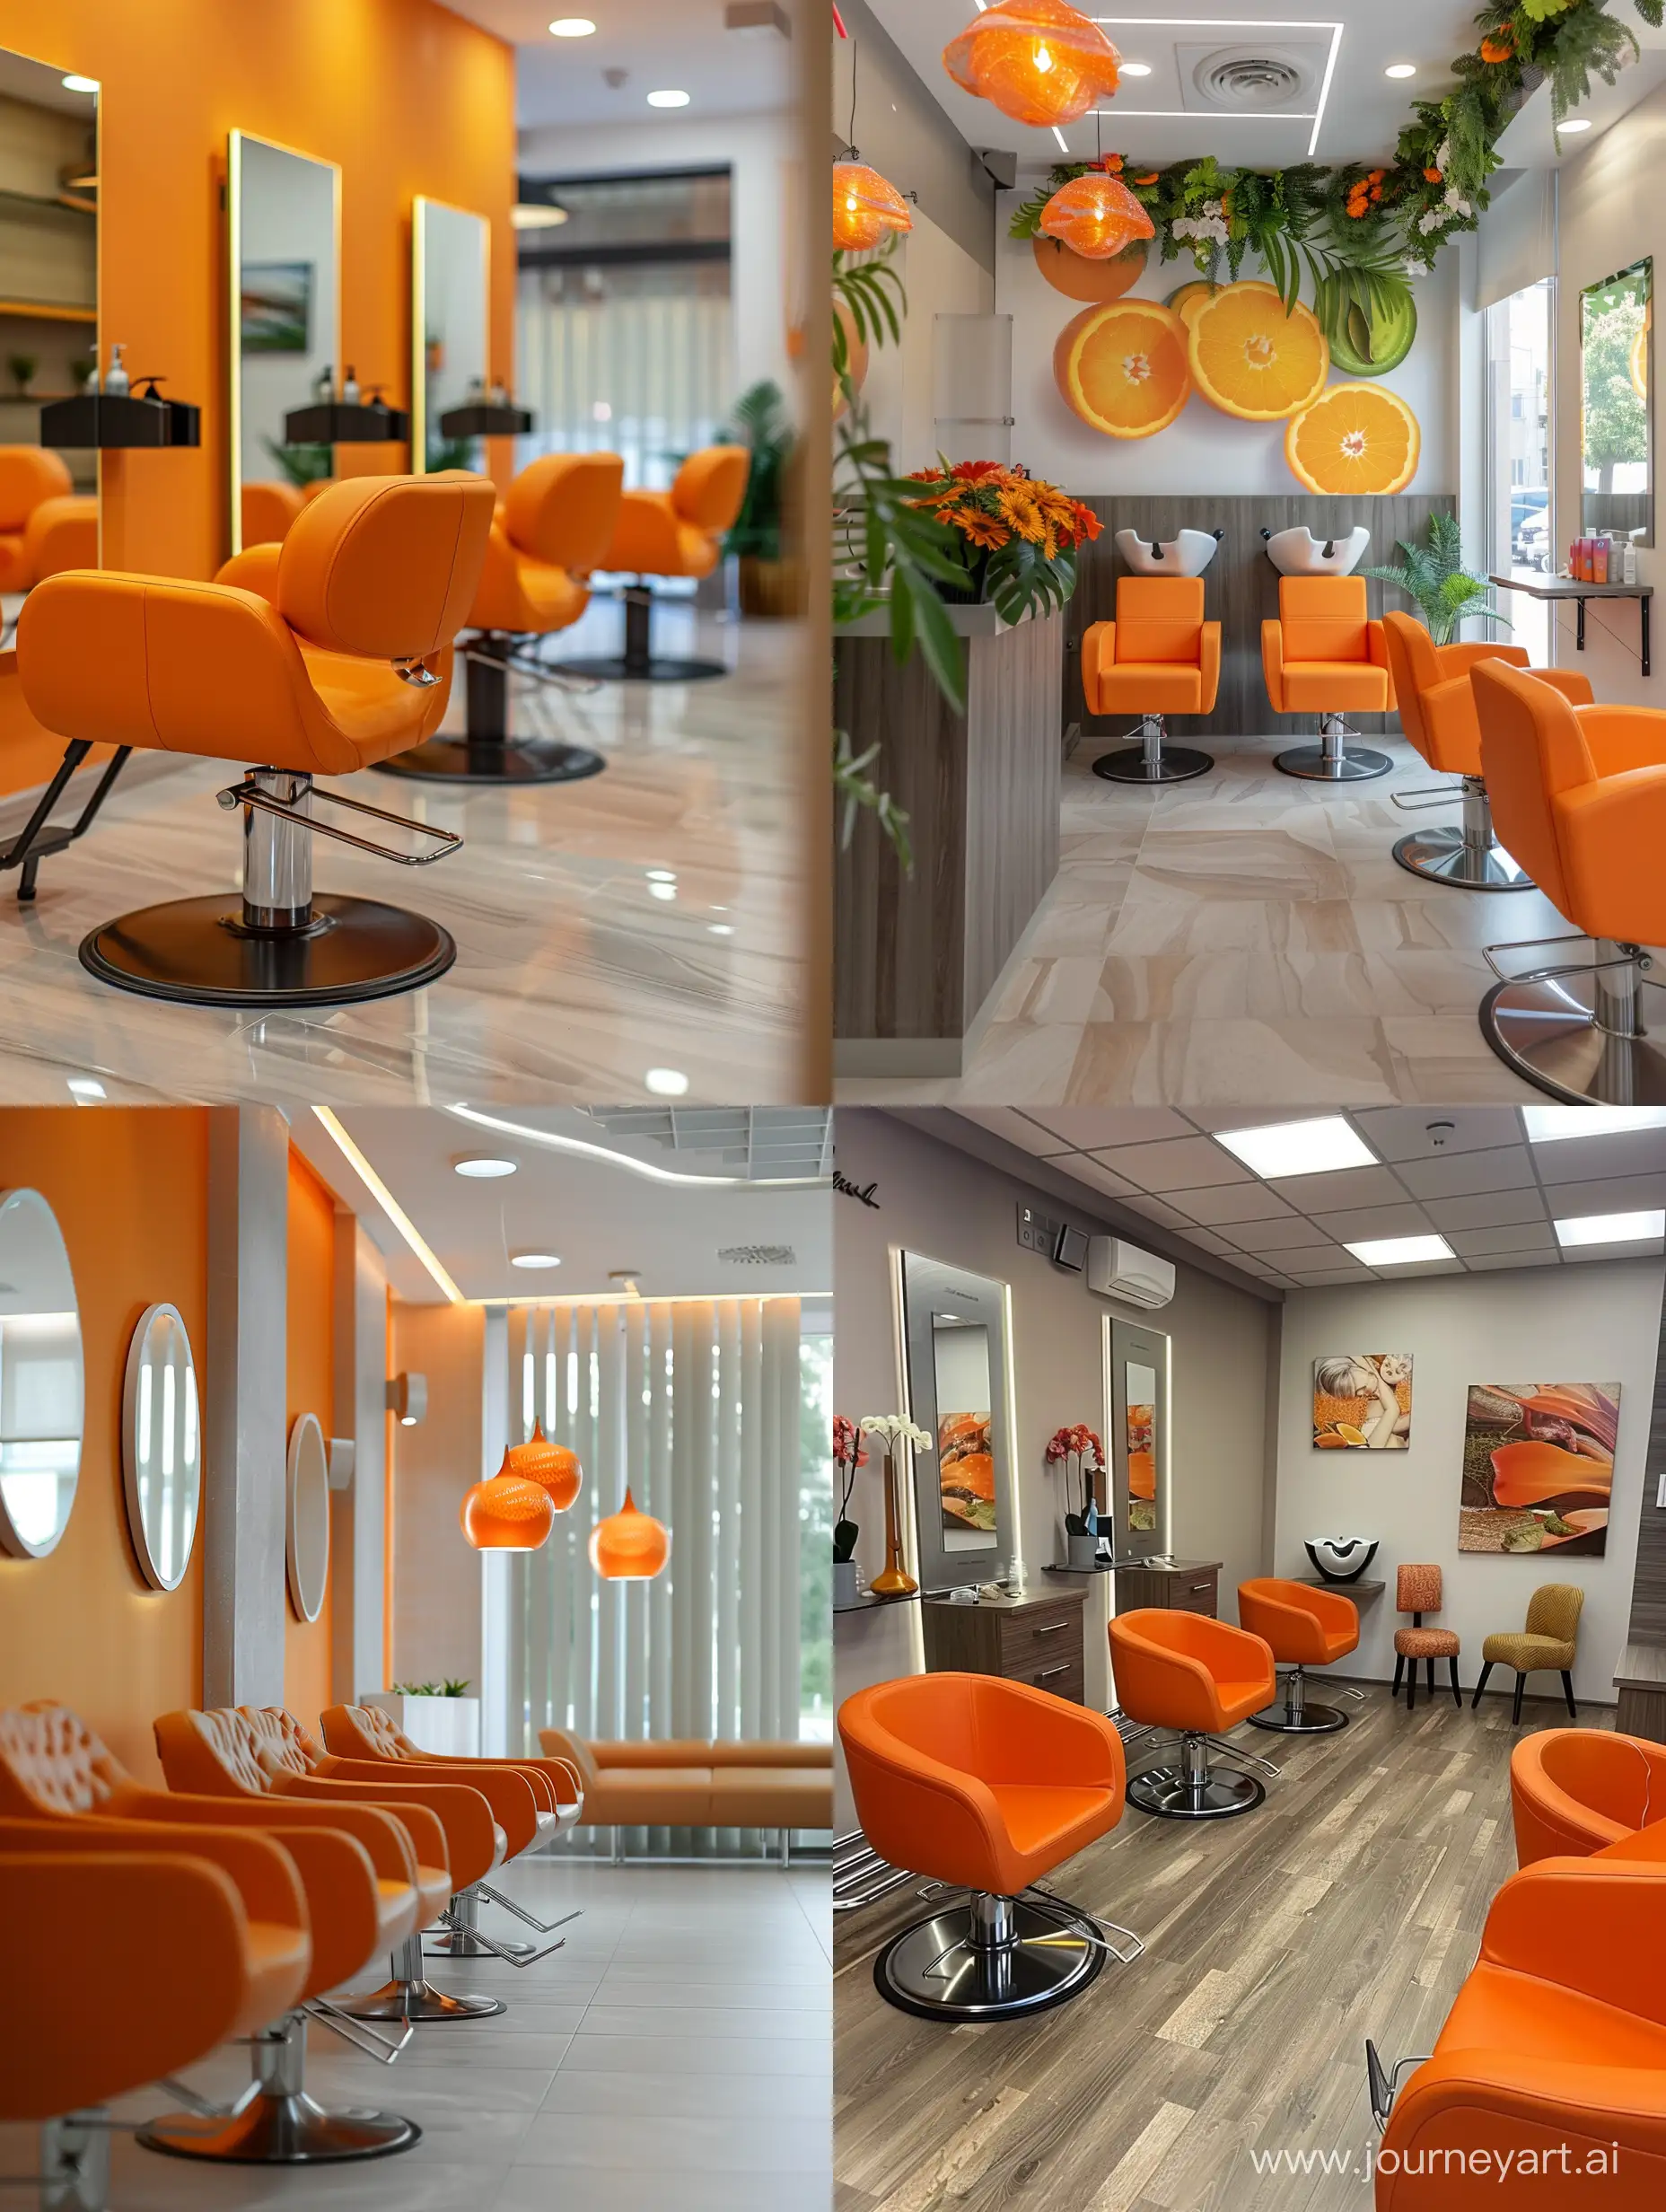 Economy-Class-Beauty-Salon-Vibrant-Orange-and-SaladColored-Freshness-with-Two-Hairdressers